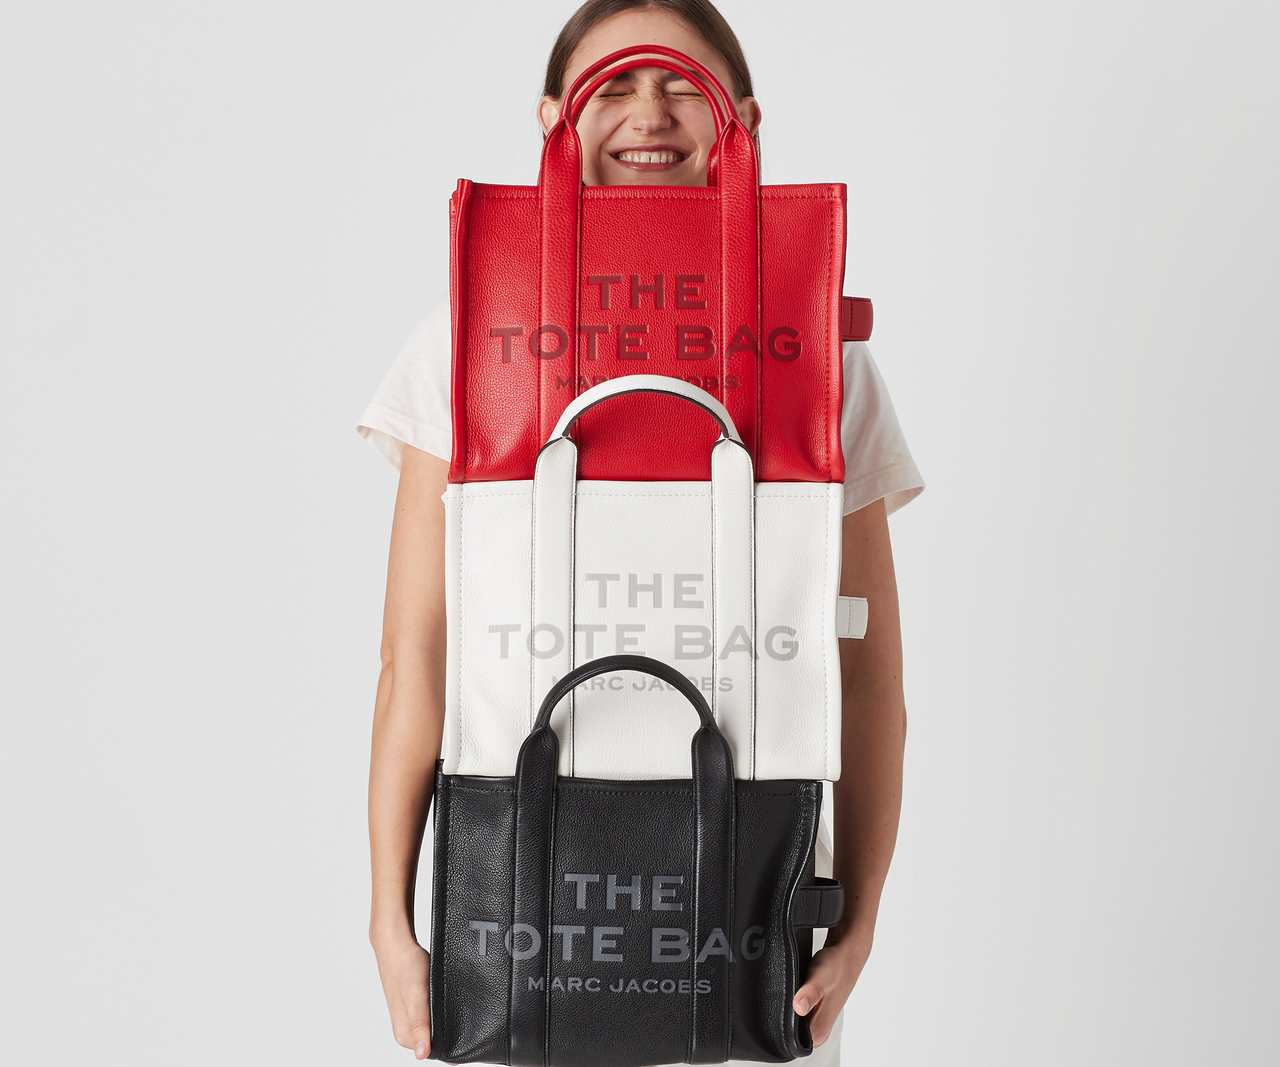 what is Marc Jacobs the tote bag